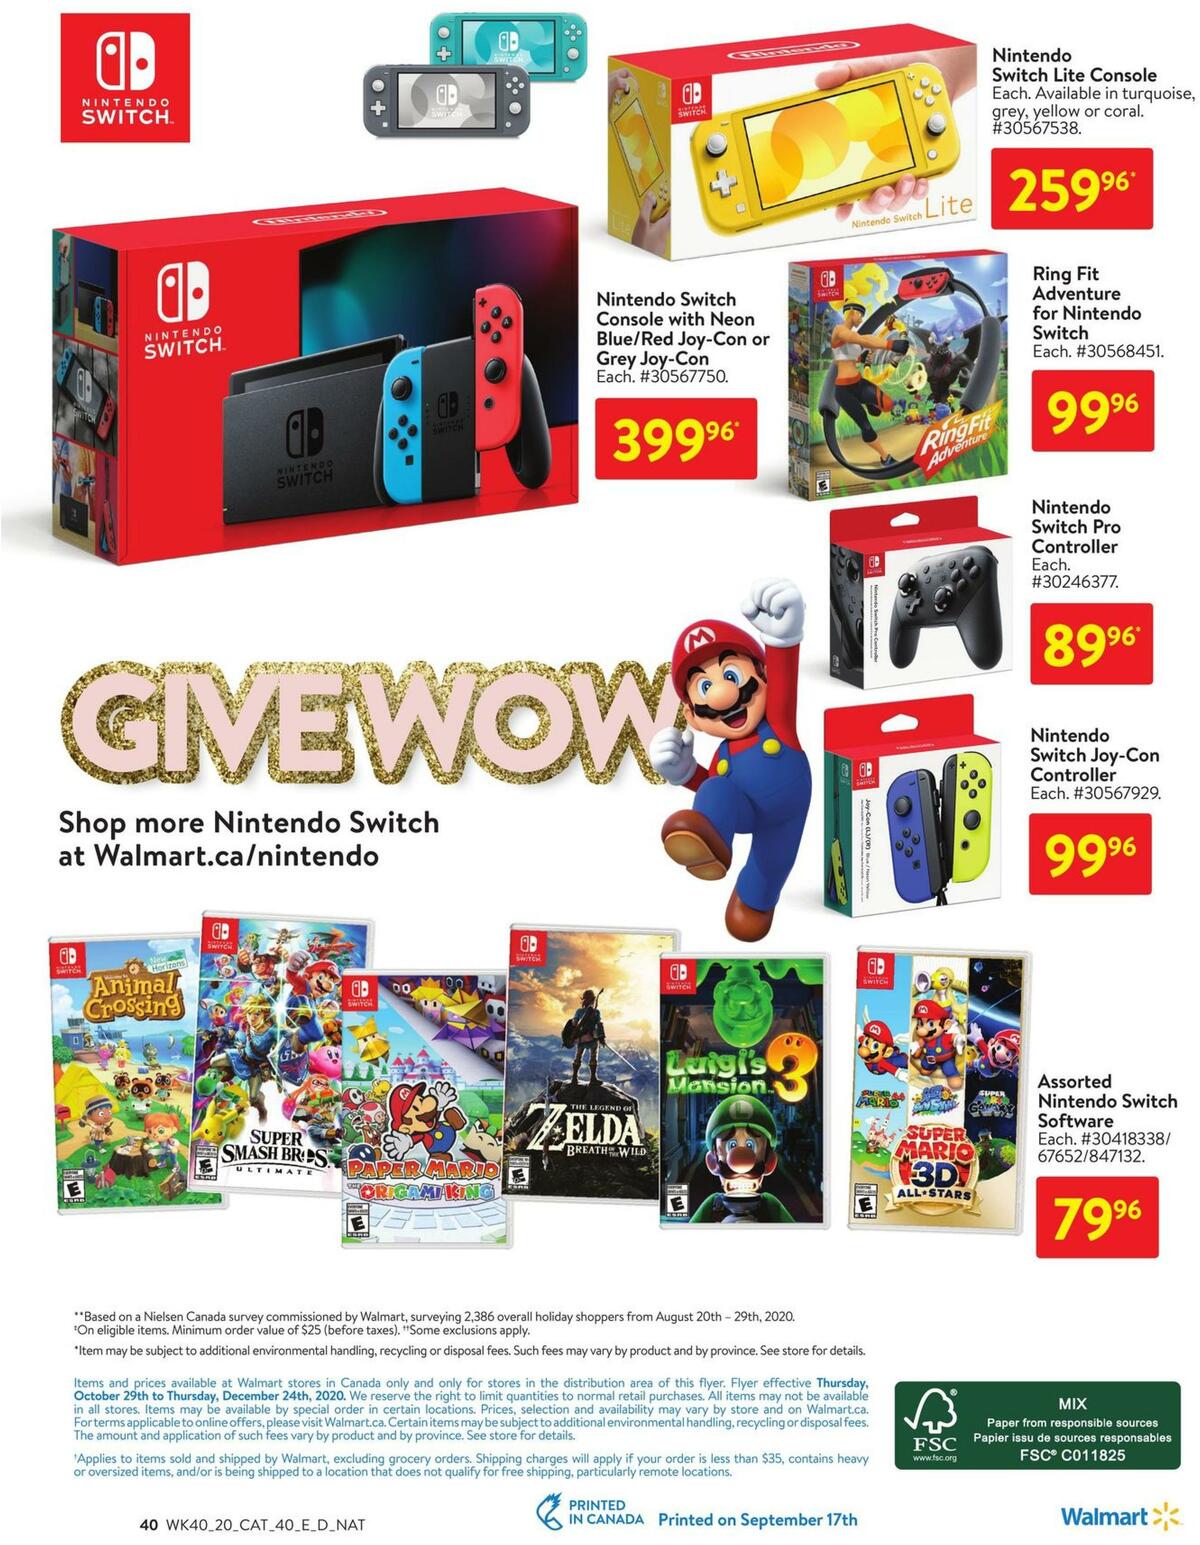 Walmart Toy Shop Flyer from October 29